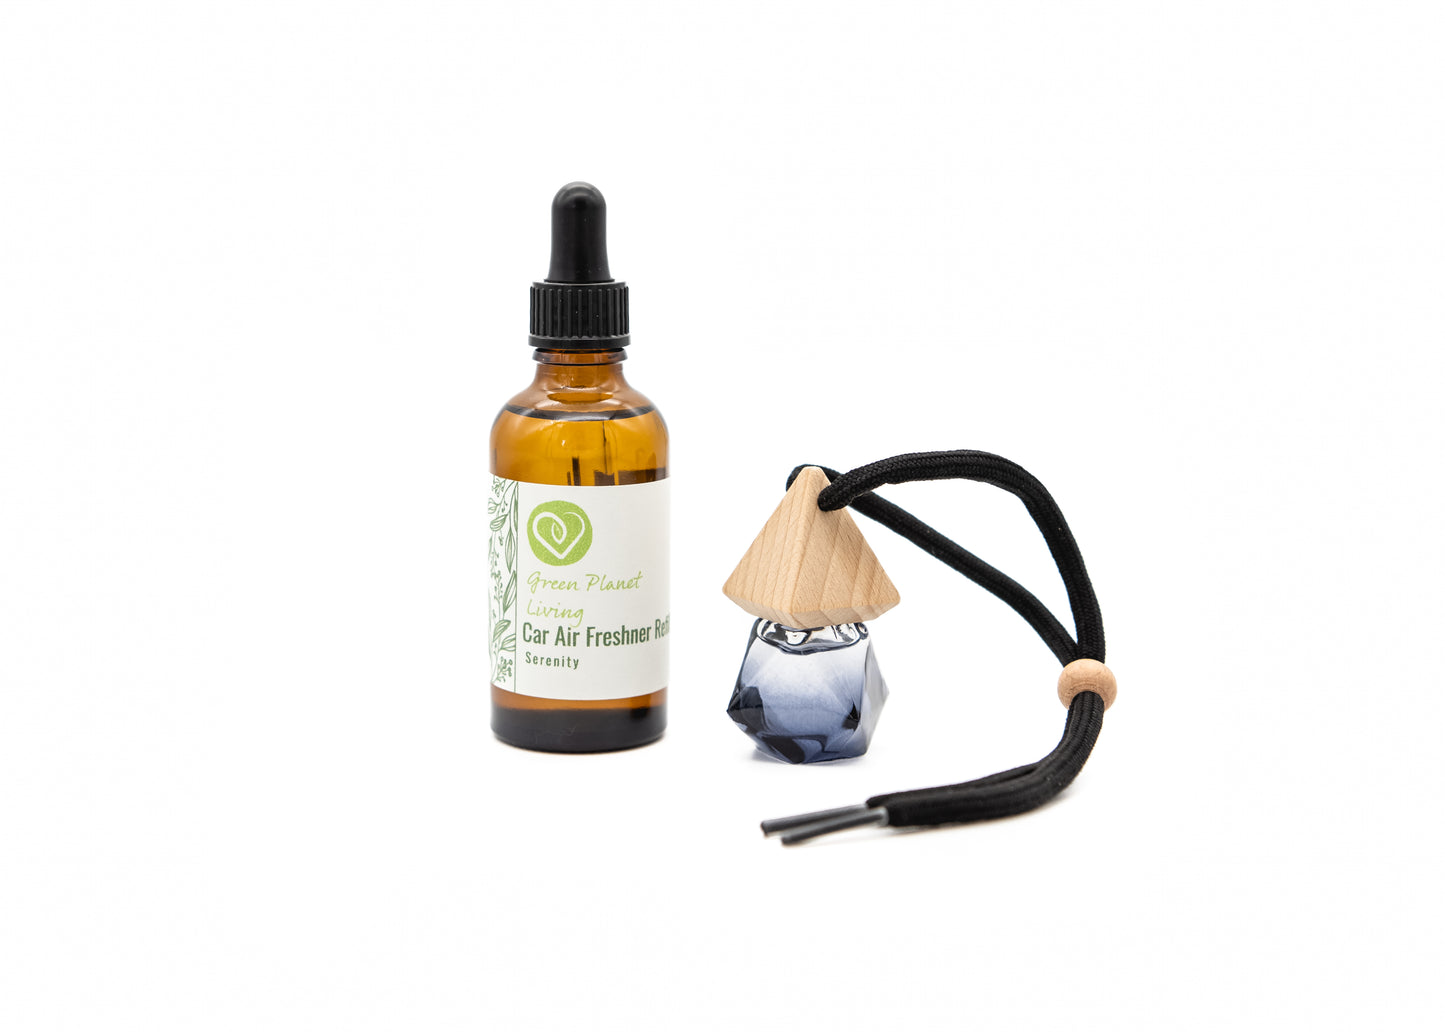 Serenity car diffuser and refill bottle